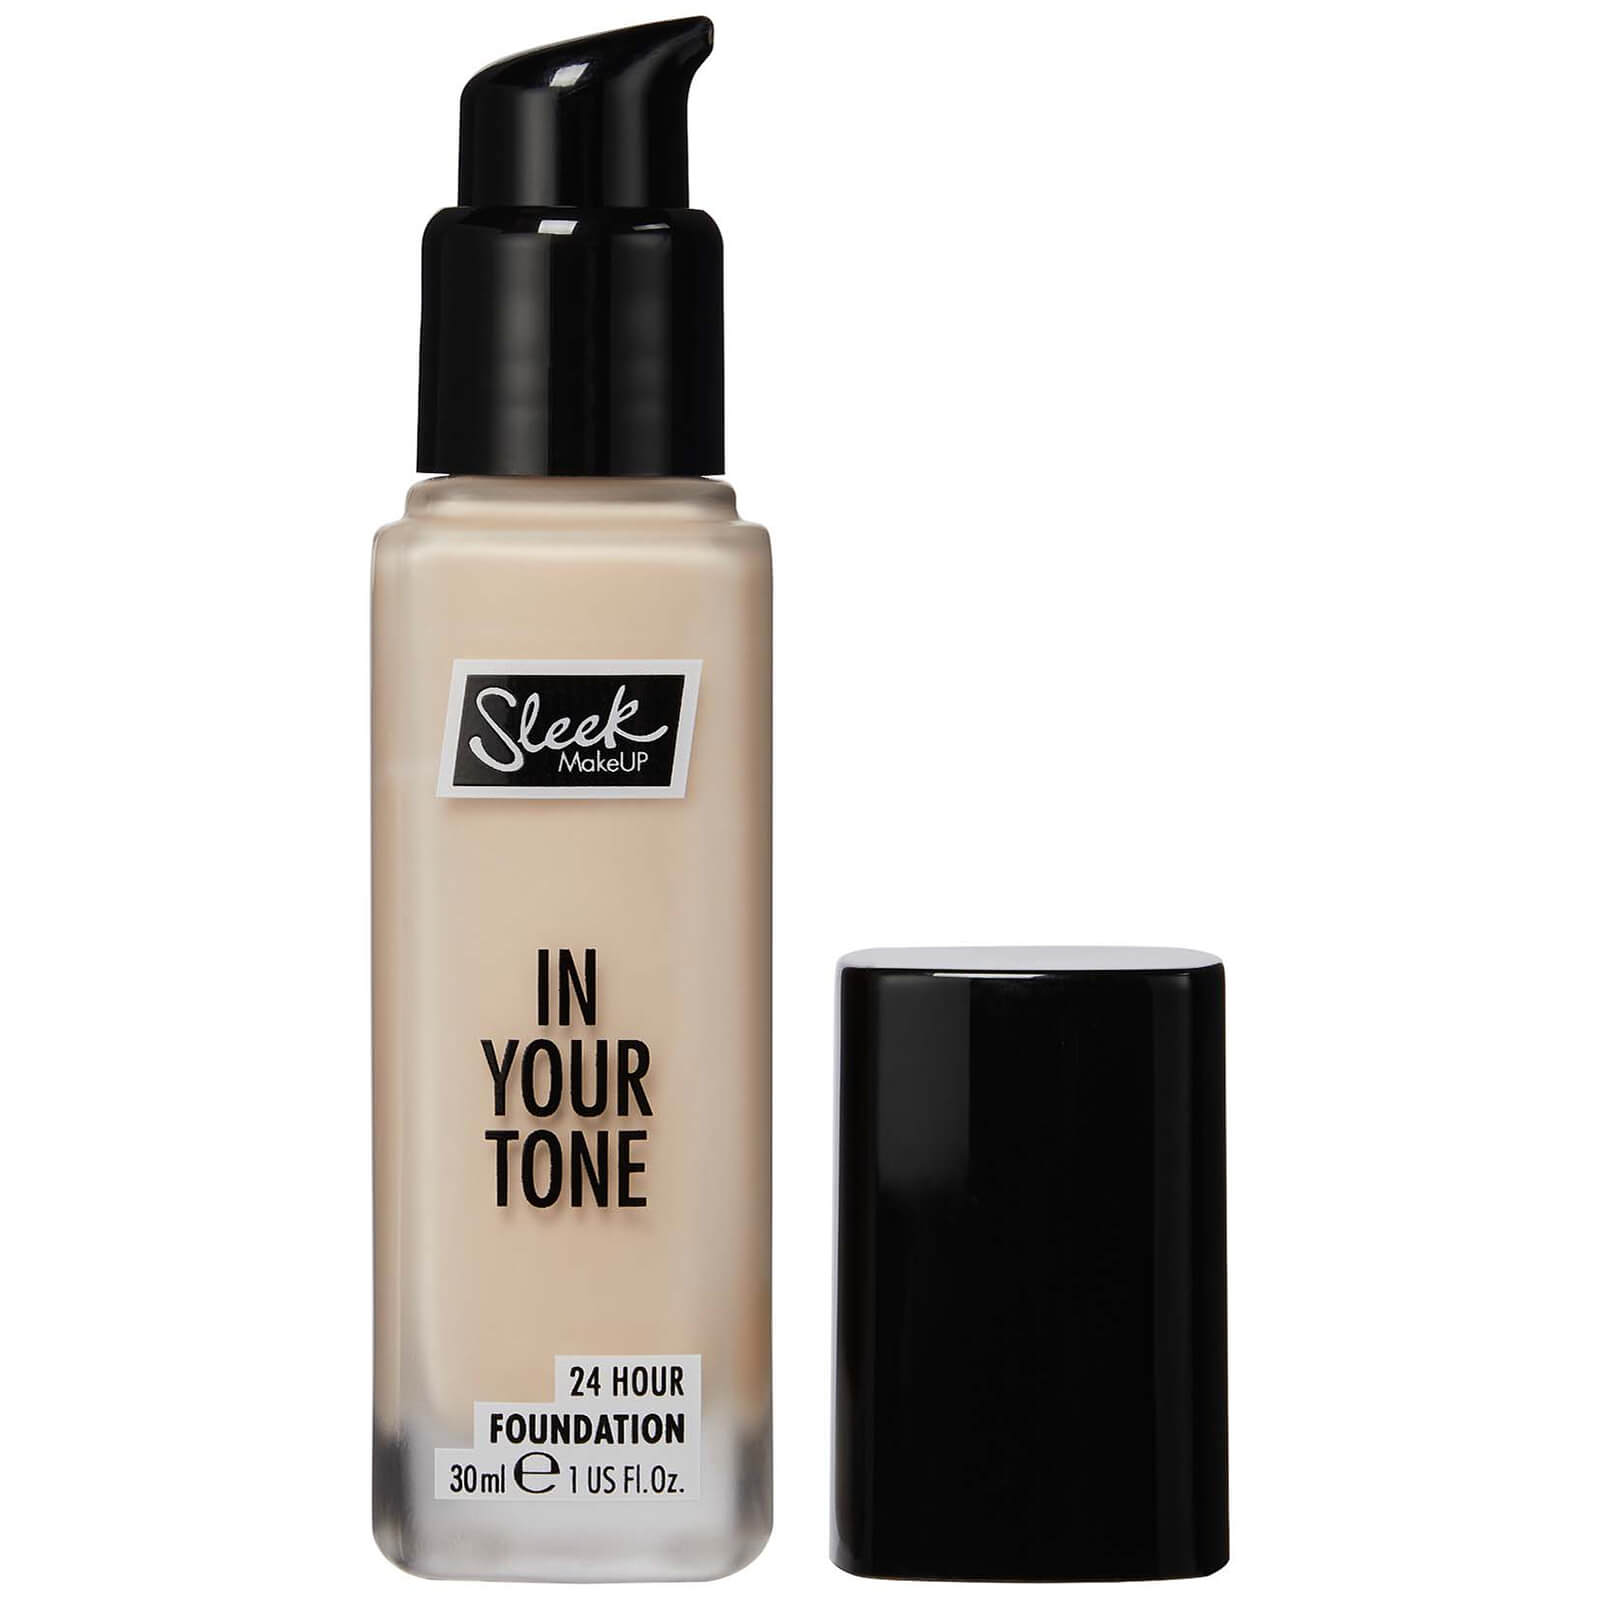 Sleek MakeUP in Your Tone 24 Hour Foundation 30ml (Various Shades) - 1C